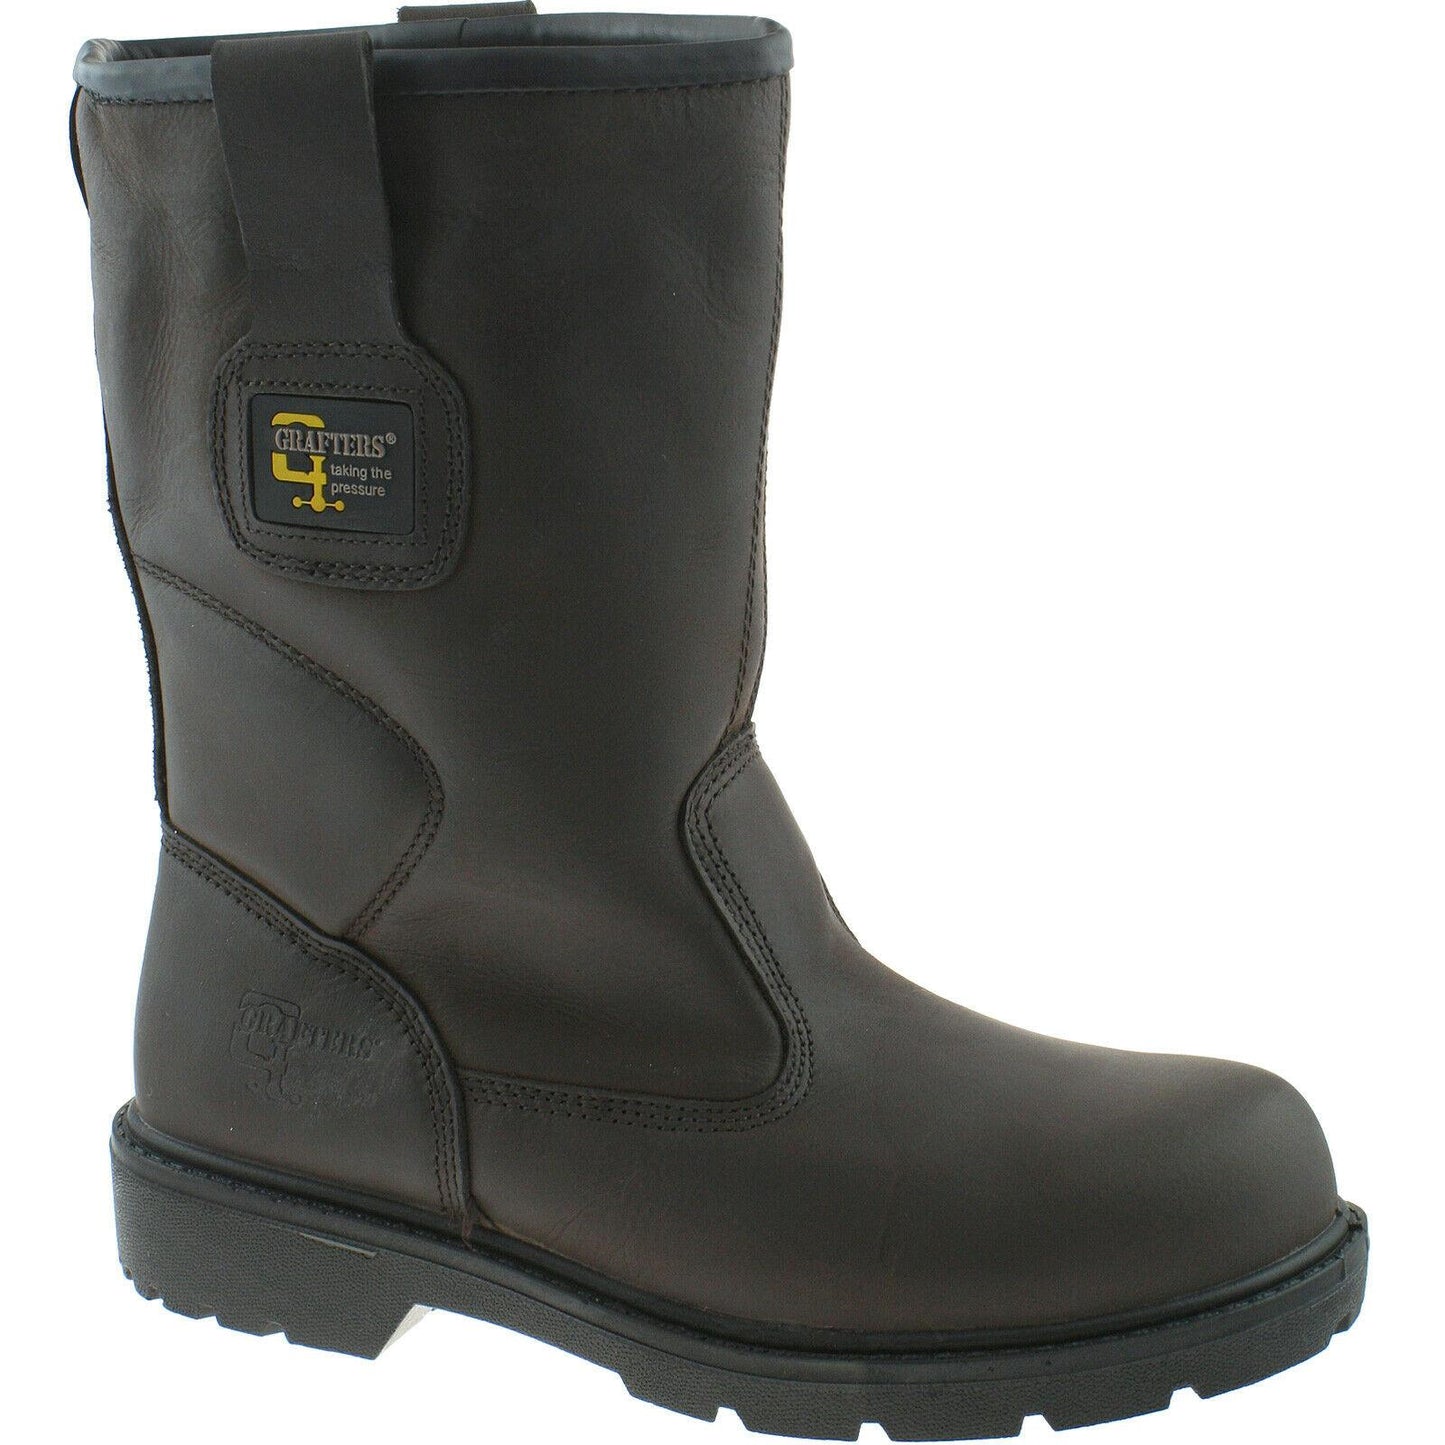 Grafters Waterproof Safety Rigger Boots Leather M560B